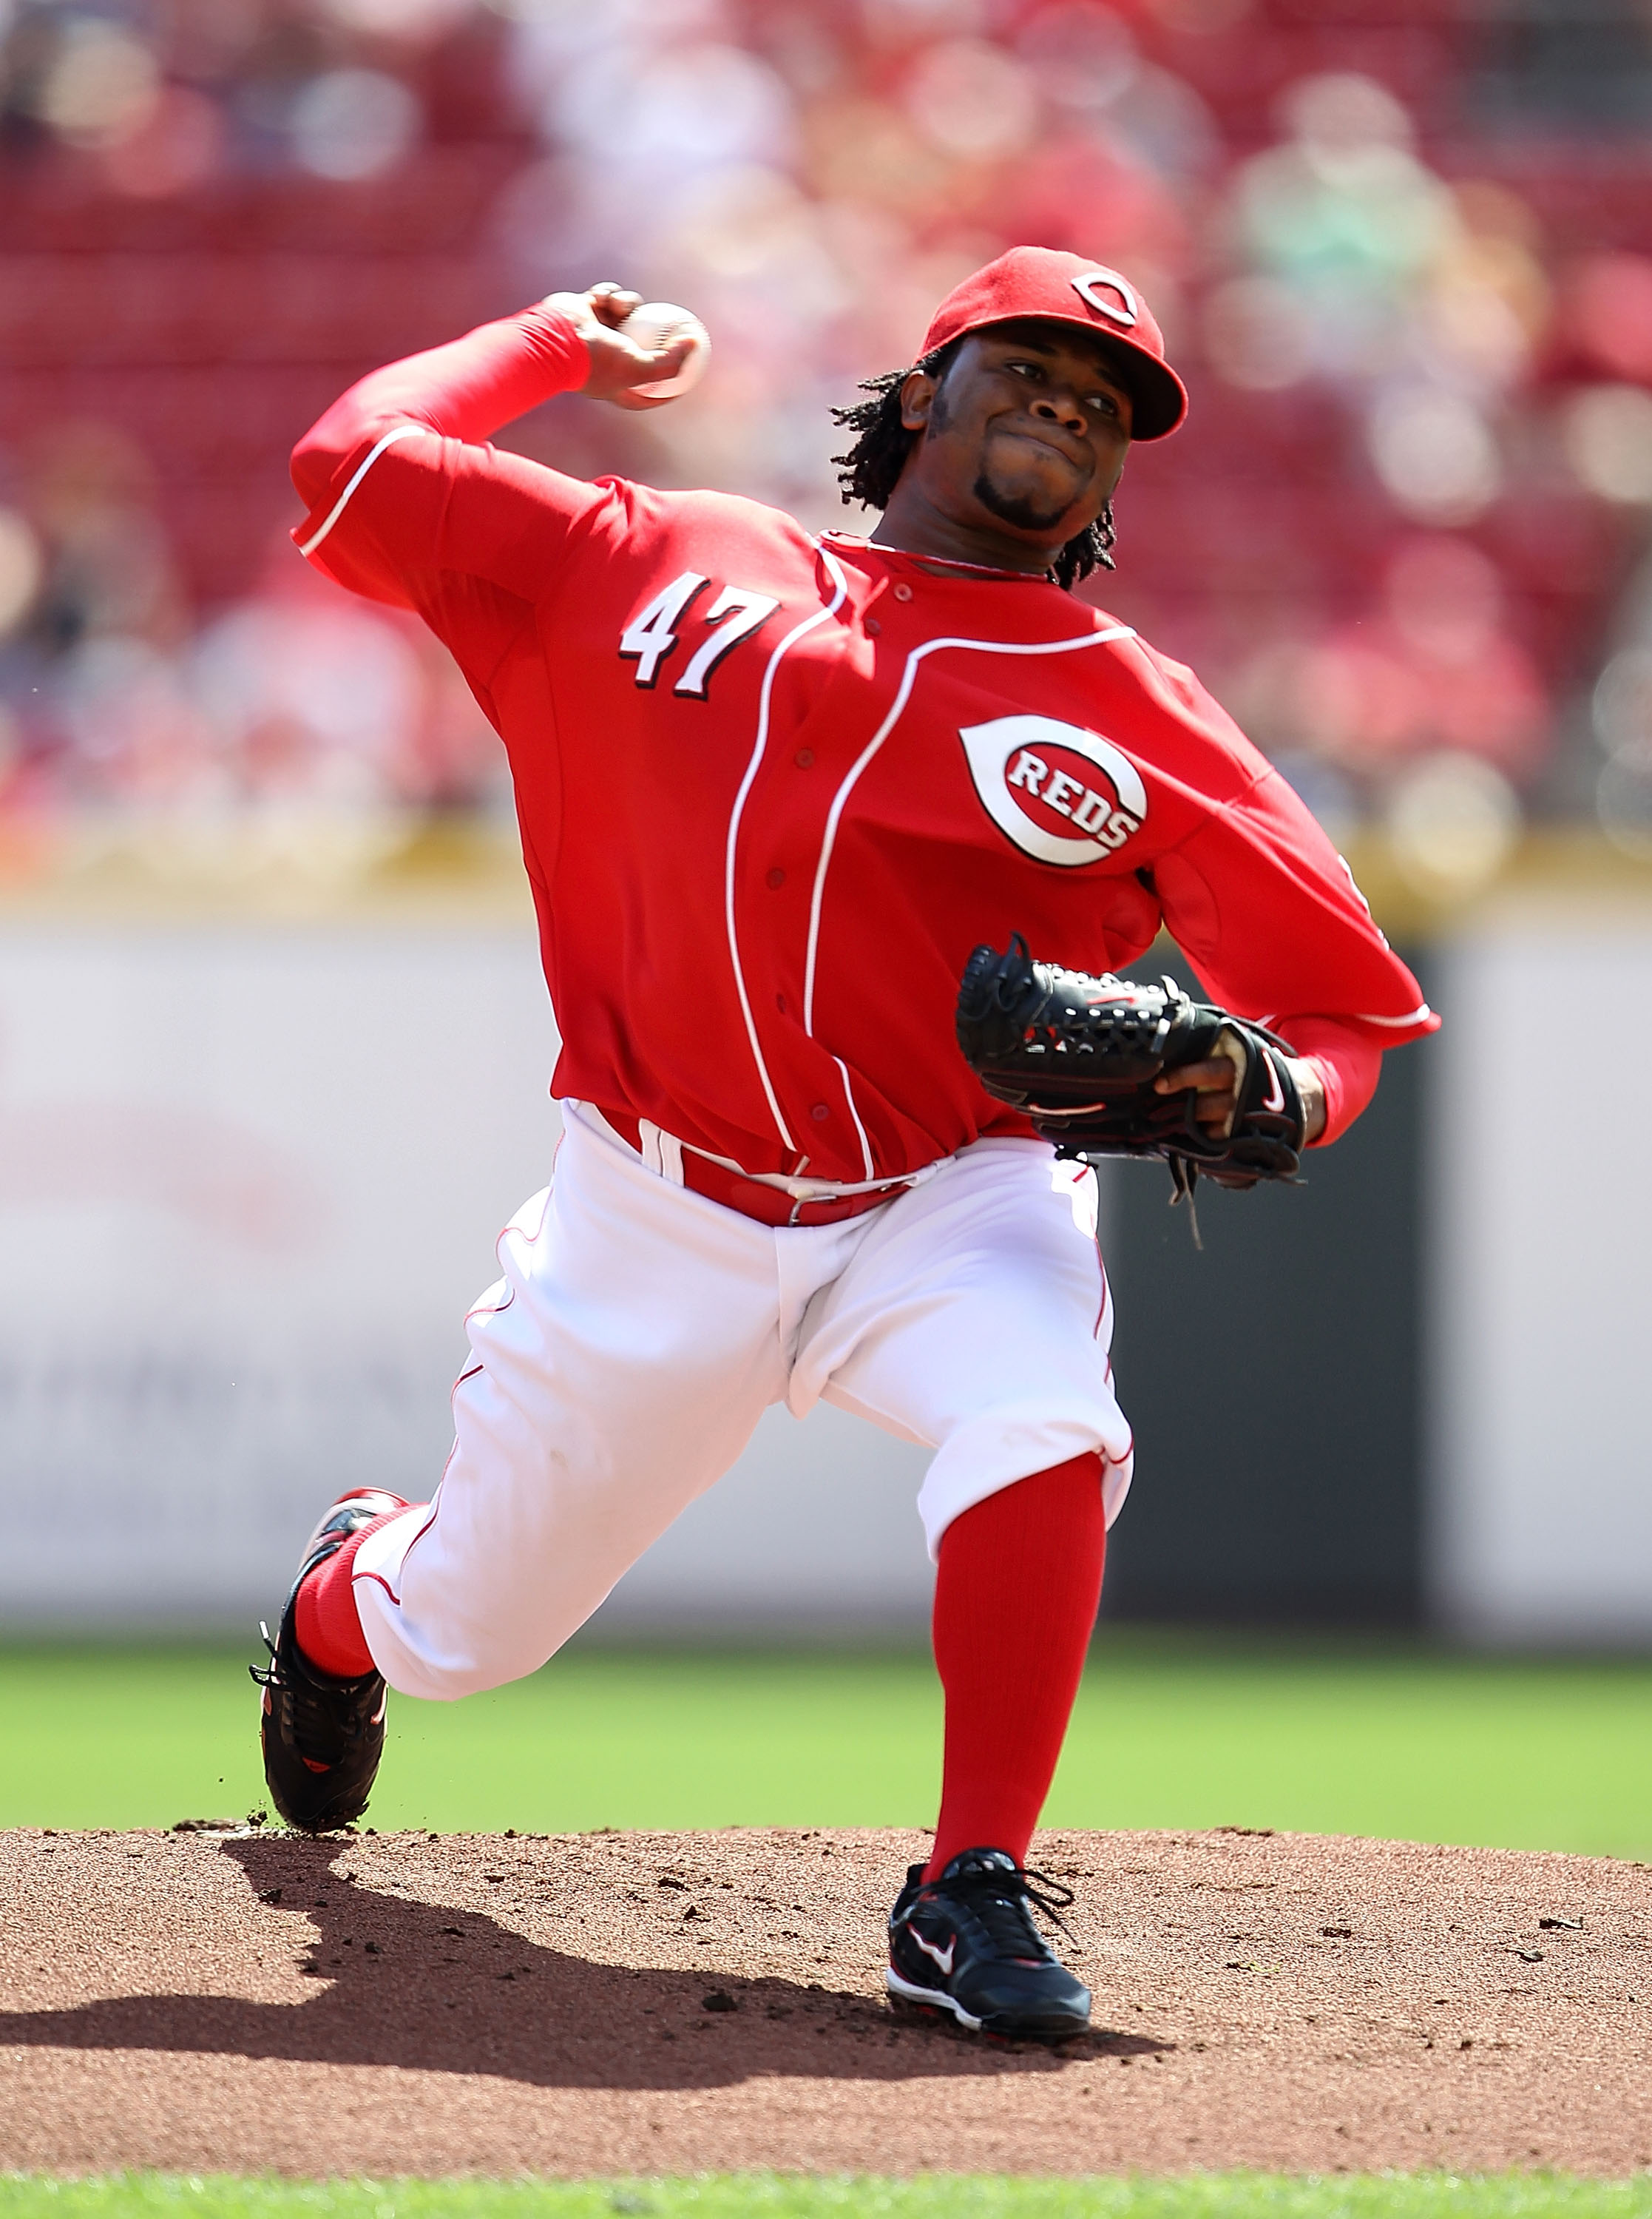 CINCINNATI - SEPTEMBER 12:  Johnny Cueto #47 of the Cincinnati Reds throws a pitch during the game against the Pittsburgh Pirates at Great American Ballpark on September 12, 2010 in Cincinnati, Ohio.  (Photo by Andy Lyons/Getty Images)